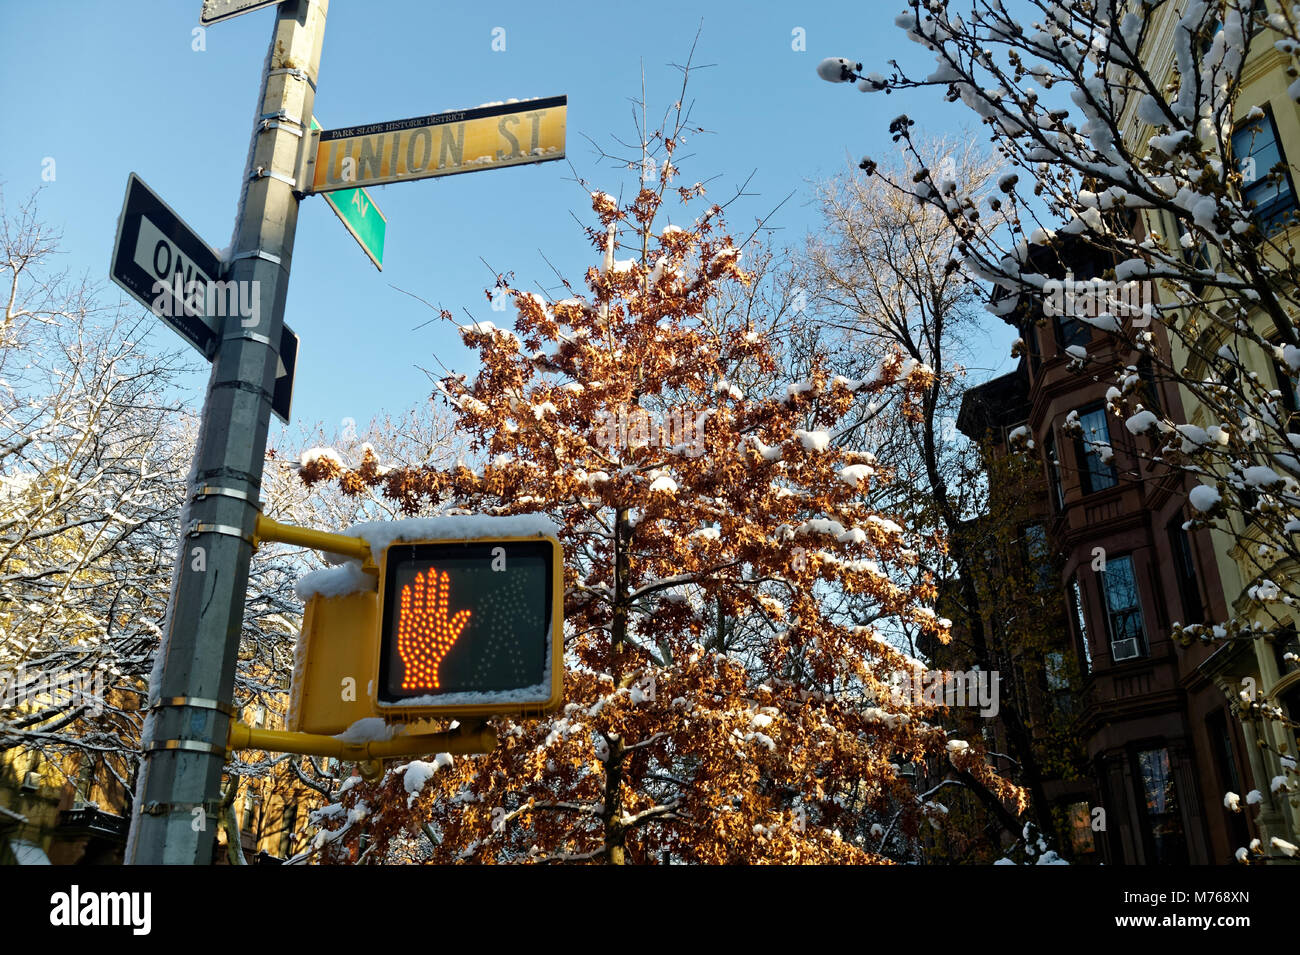 Crossing and street sign in Union Street, Park Slope Brooklyn. Stock Photo